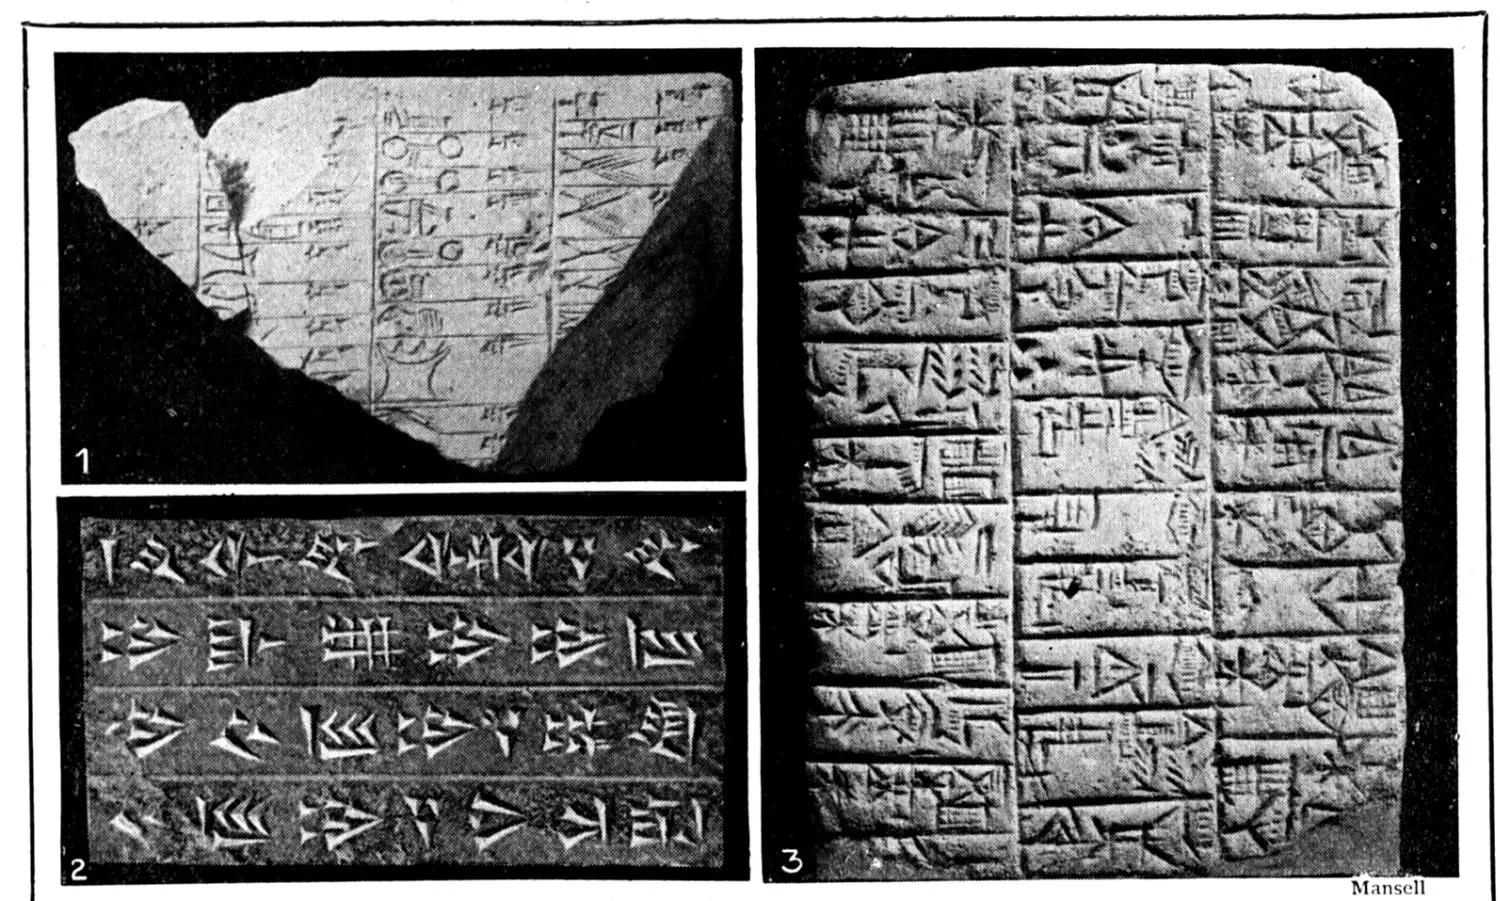 History of Sumerian Writing and Cuneiform